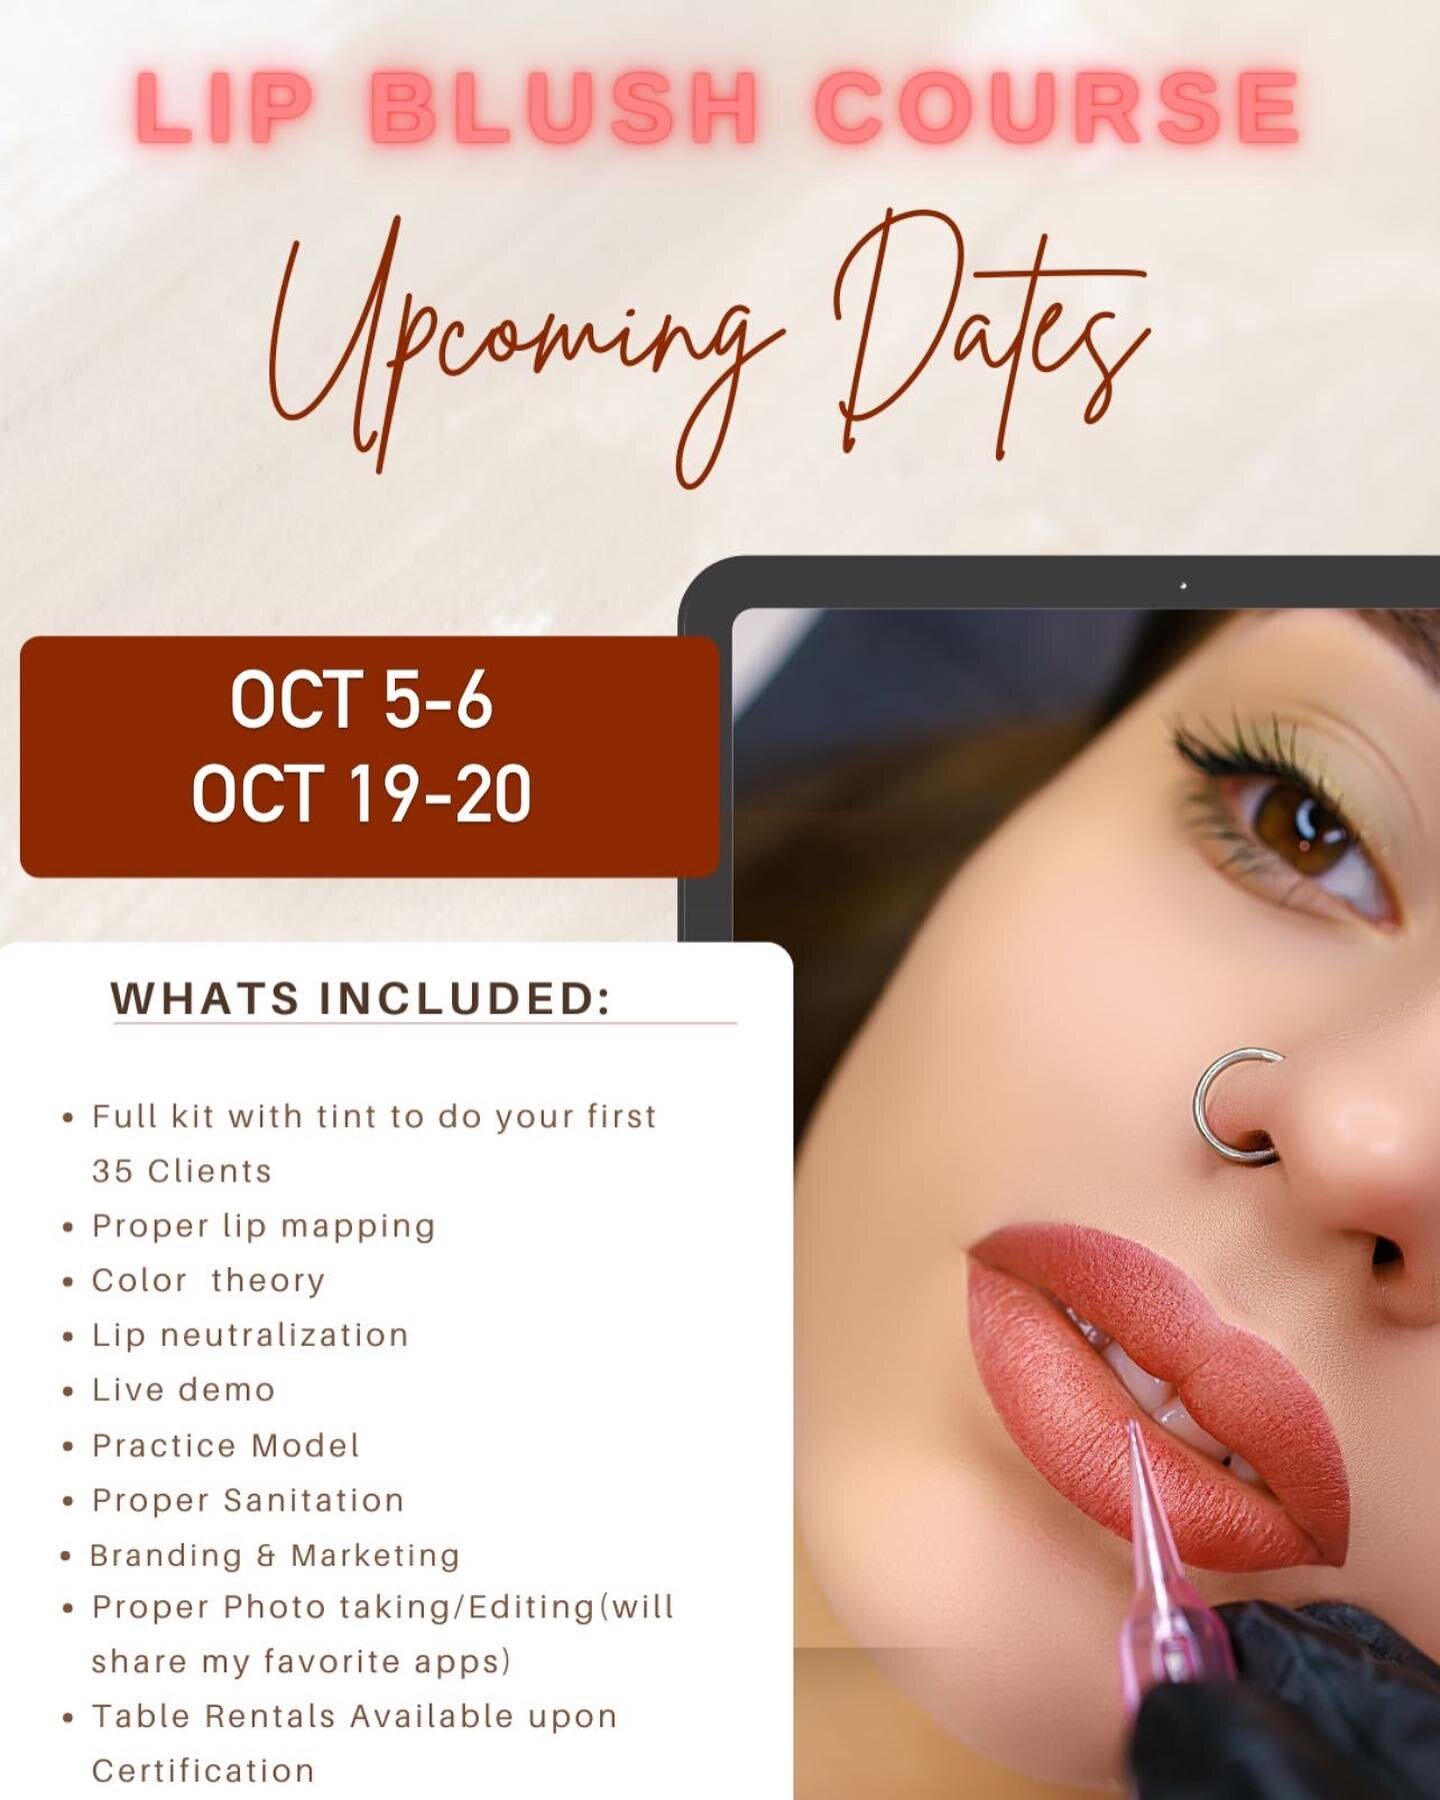 🚨New Lip Blush Training Dates For October🚨

DM with any questions or check out the training tab on my website 🤎

End the year with a bang and start your new career in the ever growing beauty indistry! No state licensing required to do PMU in AZ!! 